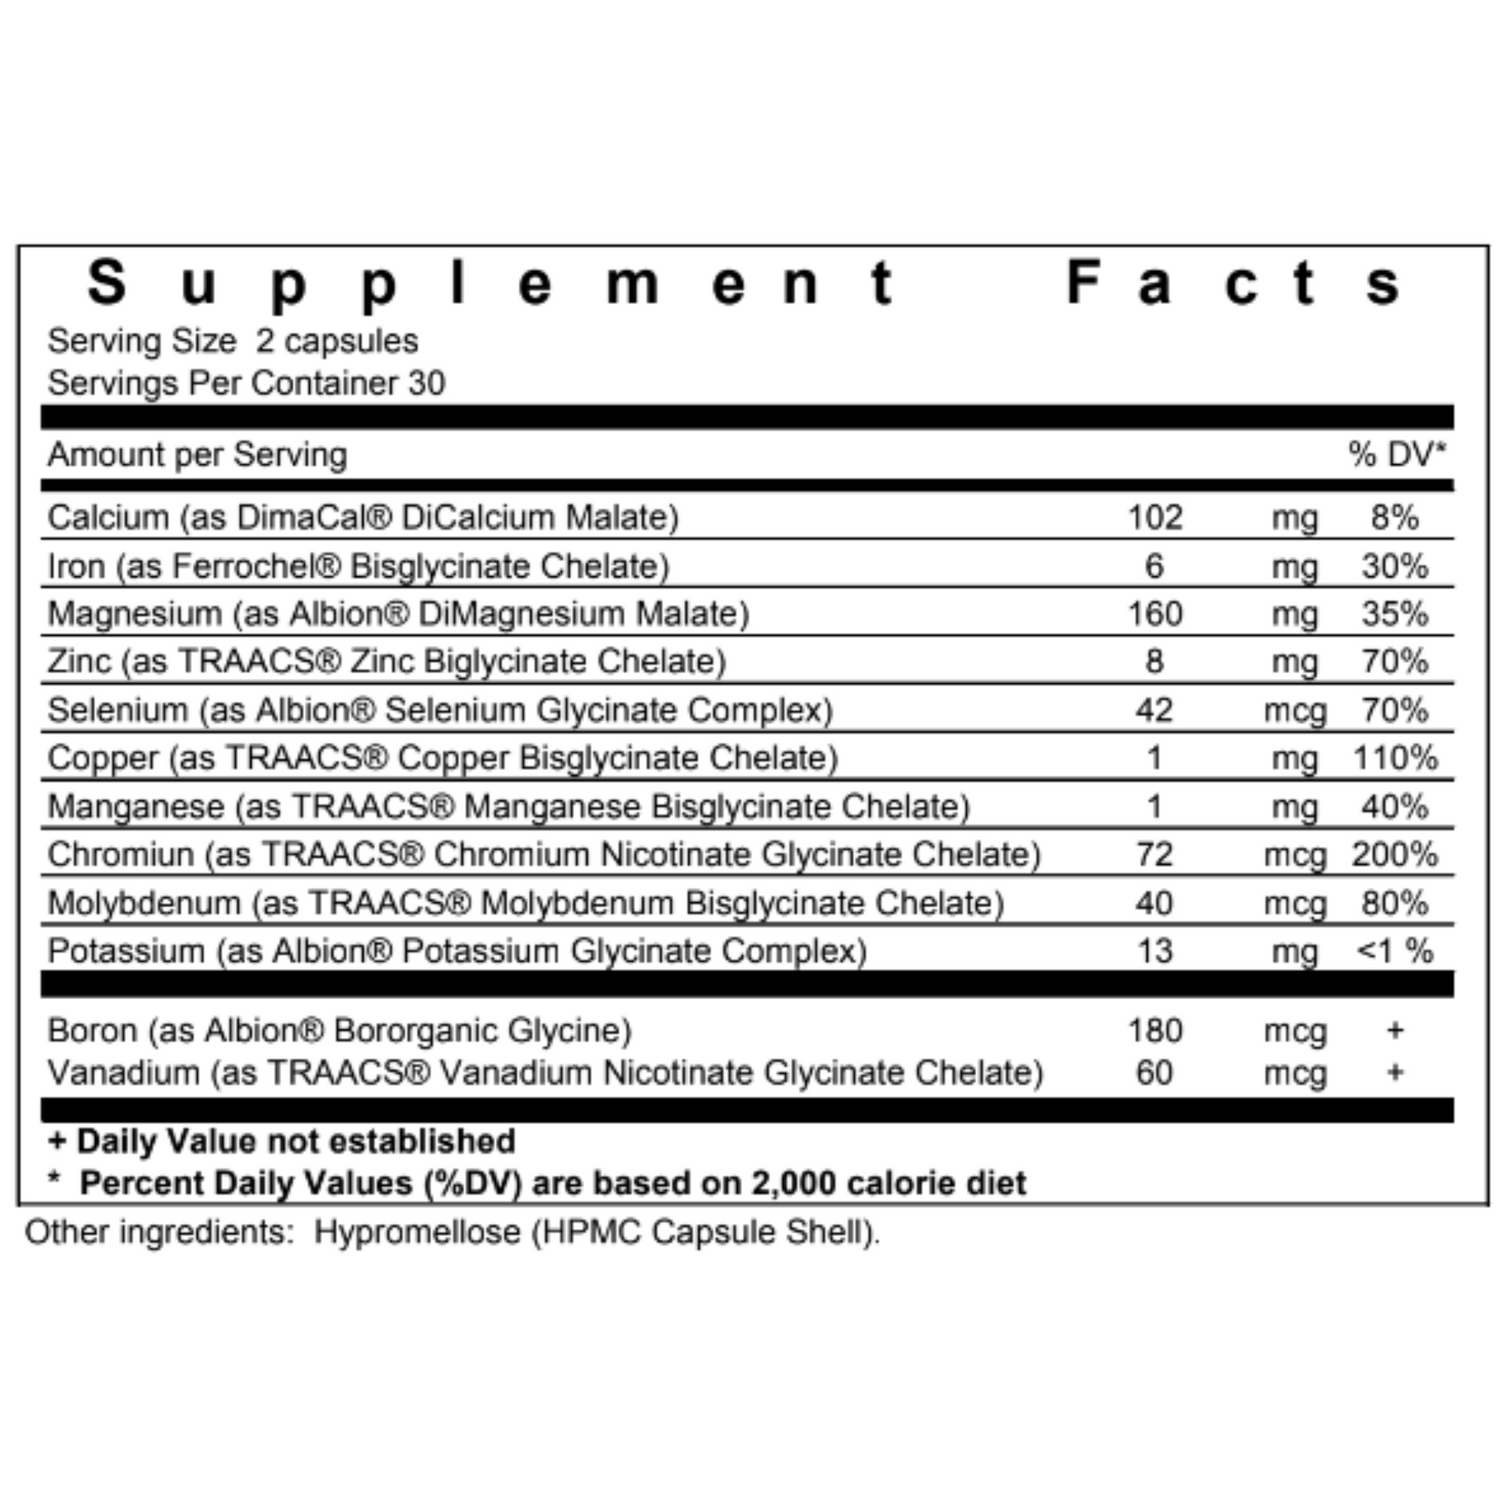 nanominerals complete chelated multi mineral supplement capsule - nutrition label